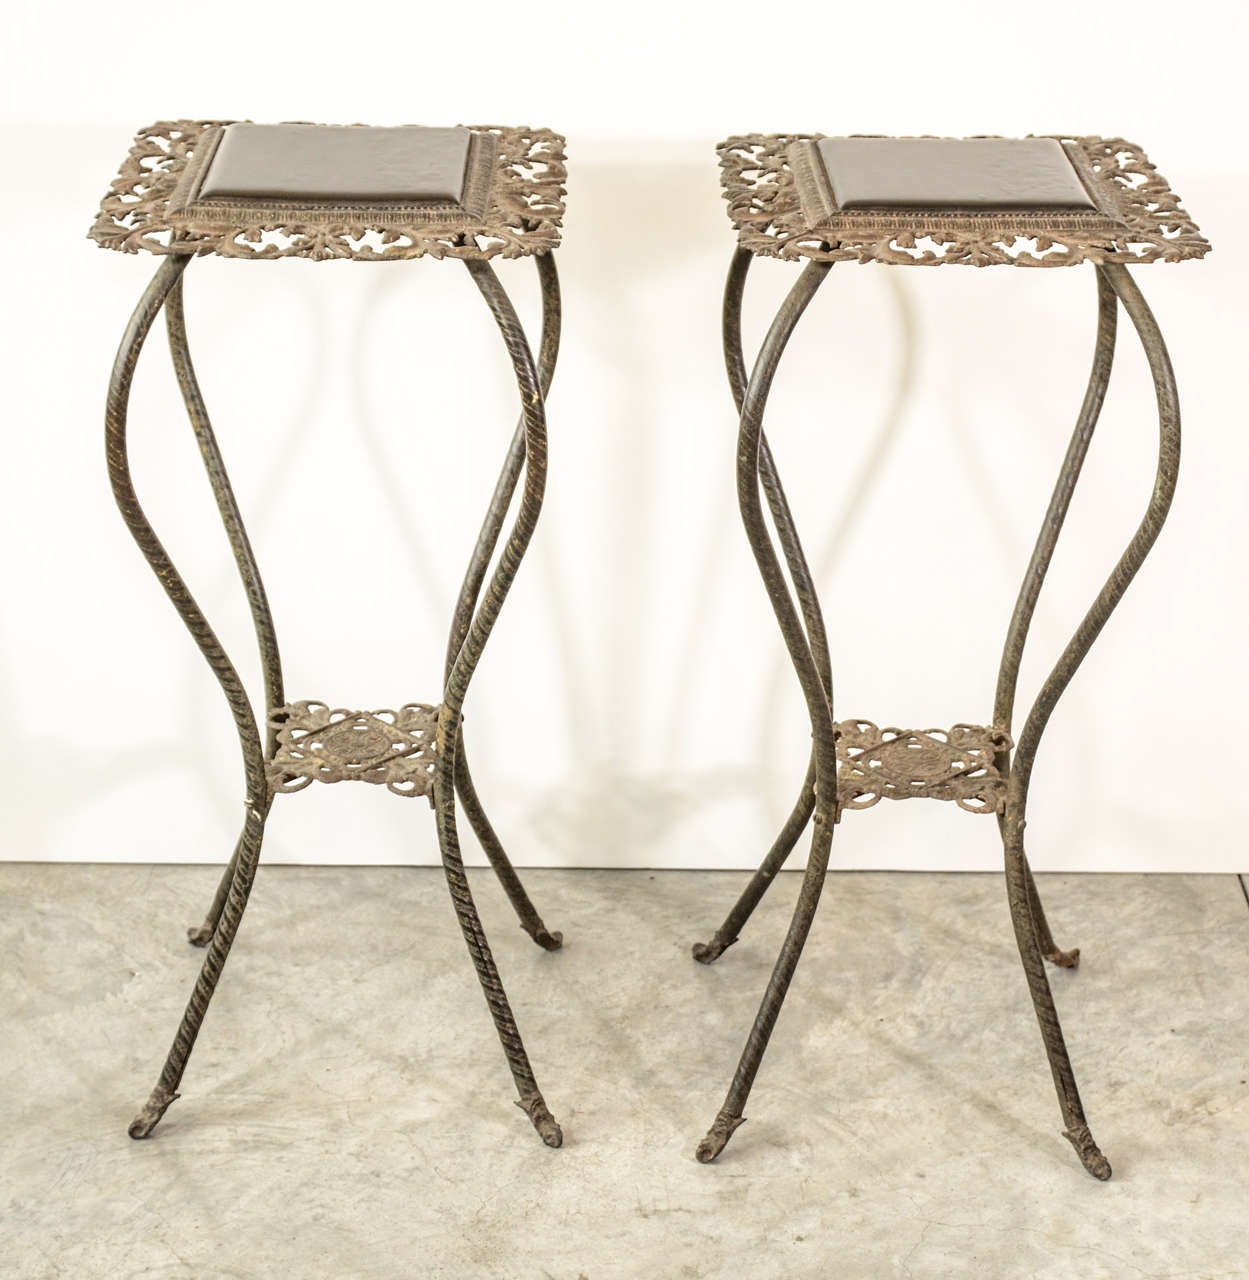 A pair of antique iron flower stands with lacquered tops. From Tianjin, China, circa 1900.  Graceful and unusual.
T509